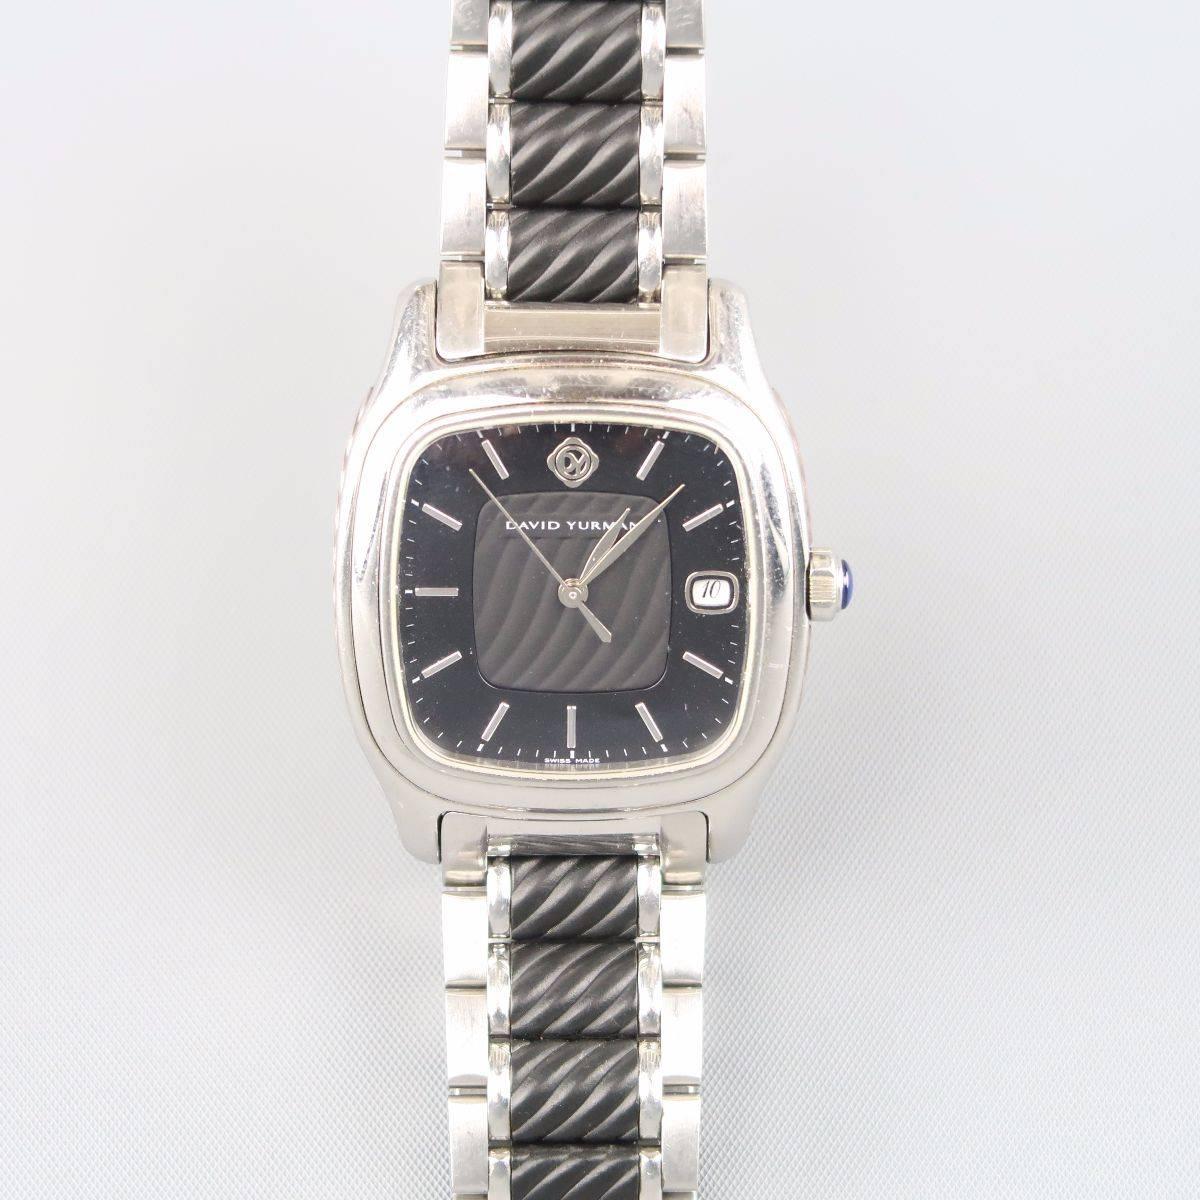 DAVID YURMAN Thoroughbred wrist watch comes in polished silver tone stainless steel with black textured accents with a square clock face.

Retails at: $2,400.00
Good Pre-Owned Condition.
Marked: B-02194 / T301-LST
 
Fits: about 7.5 inch Wrist.
Face: